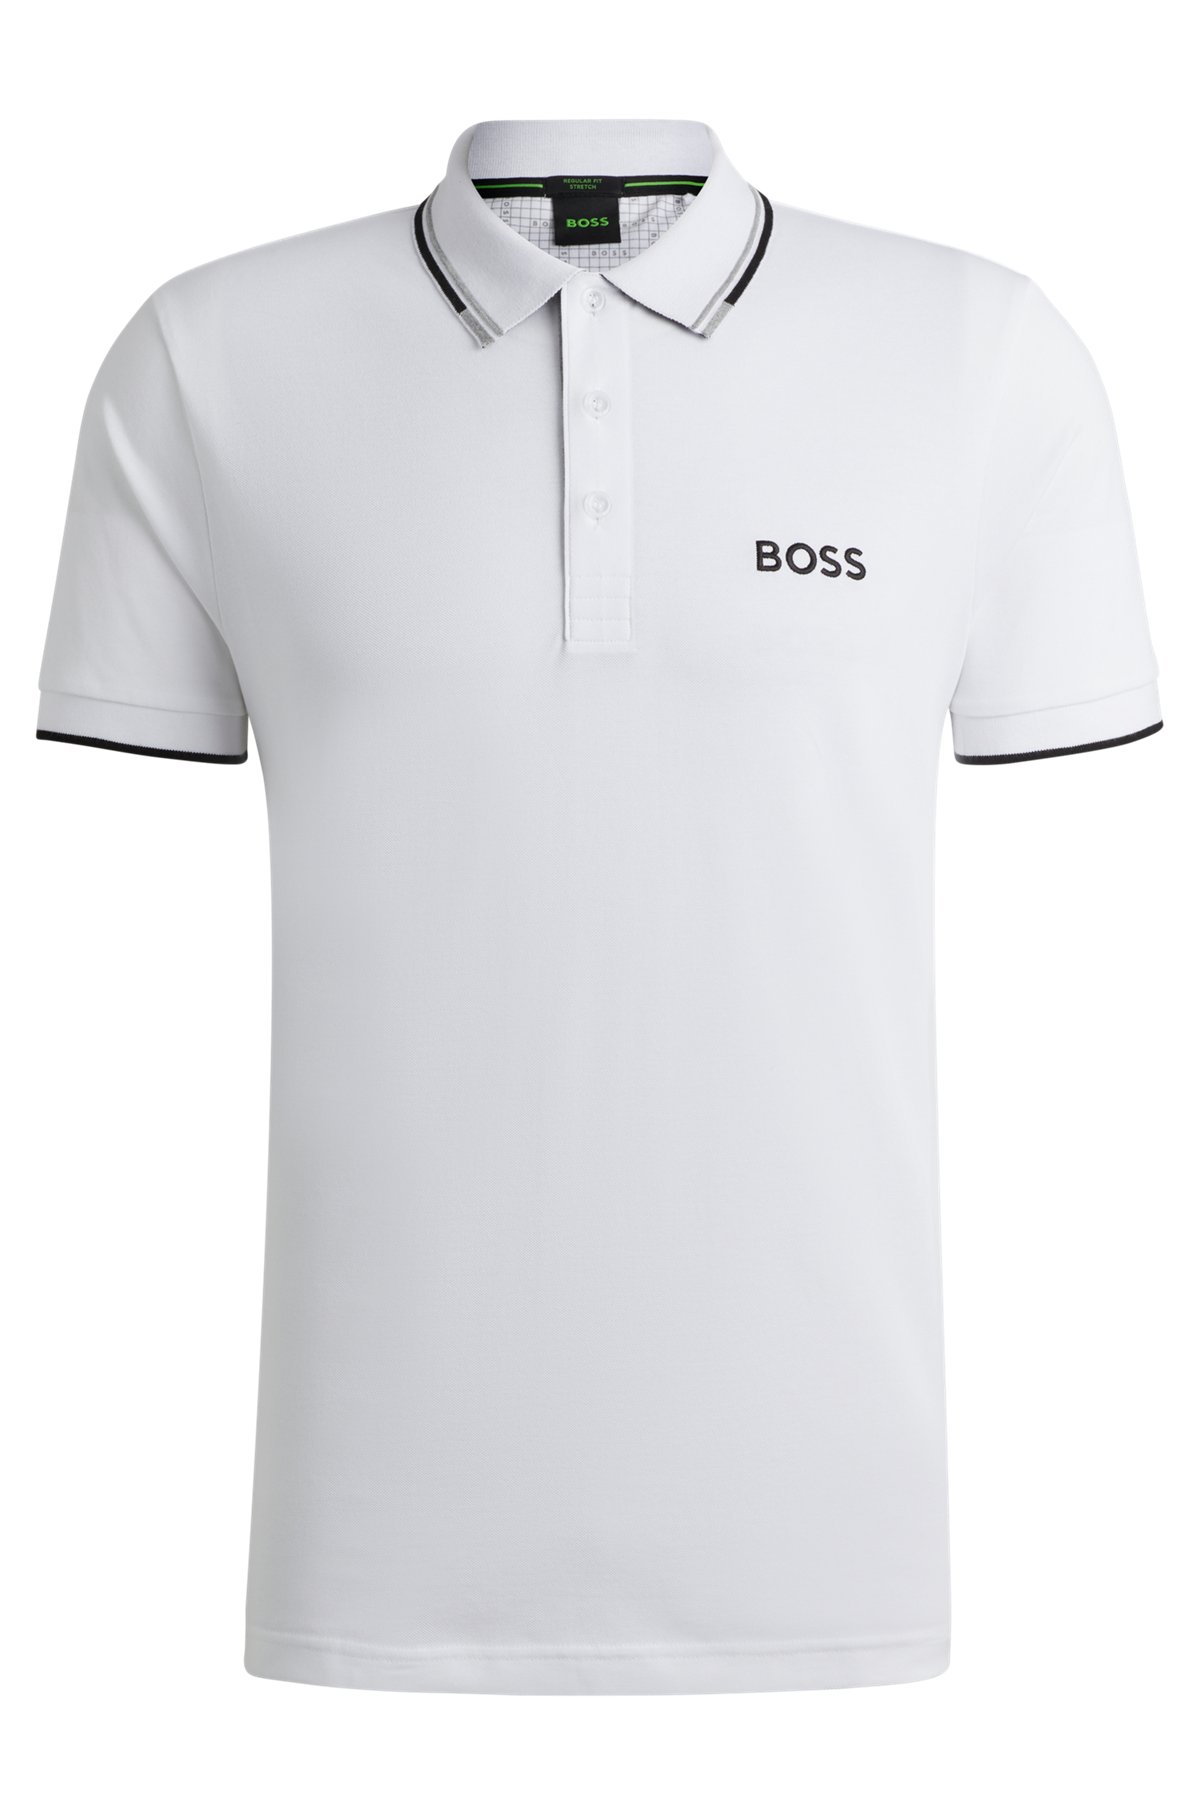 BOSS - logos Polo with shirt contrast